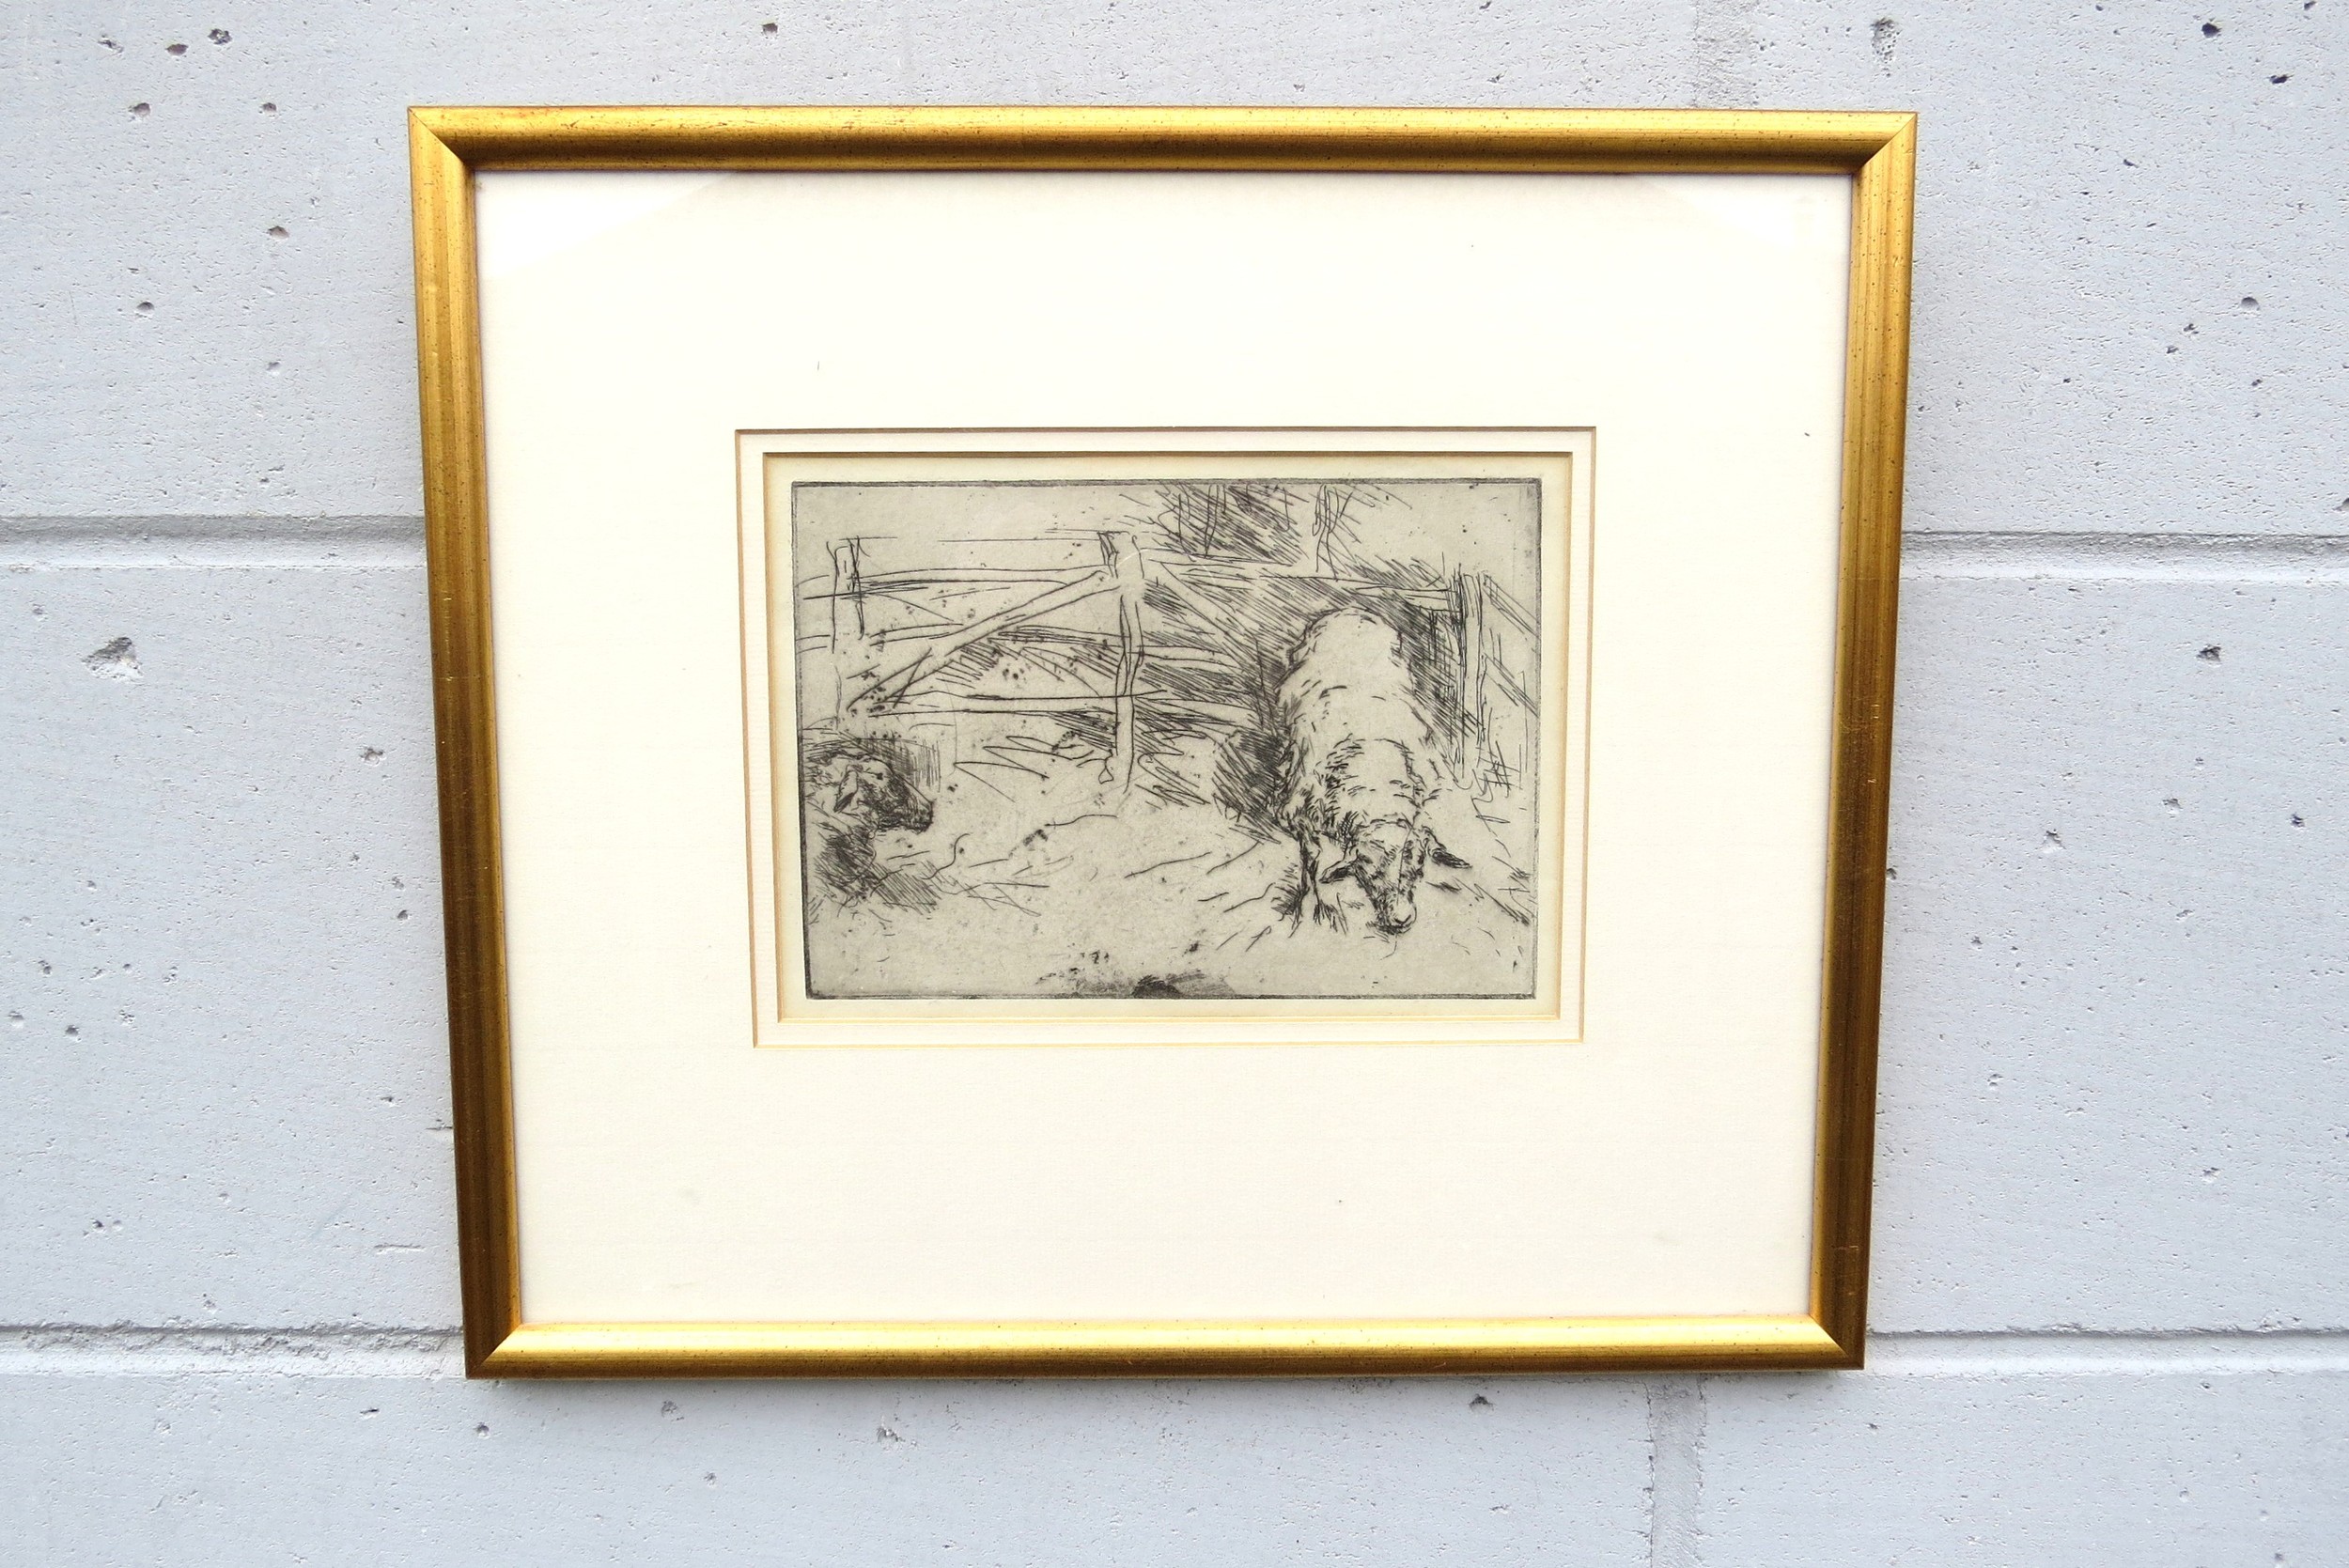 A framed and glazed lithograph after Harry Becker (1865-1928) Sheep in a pen. Unsigned. Plate size